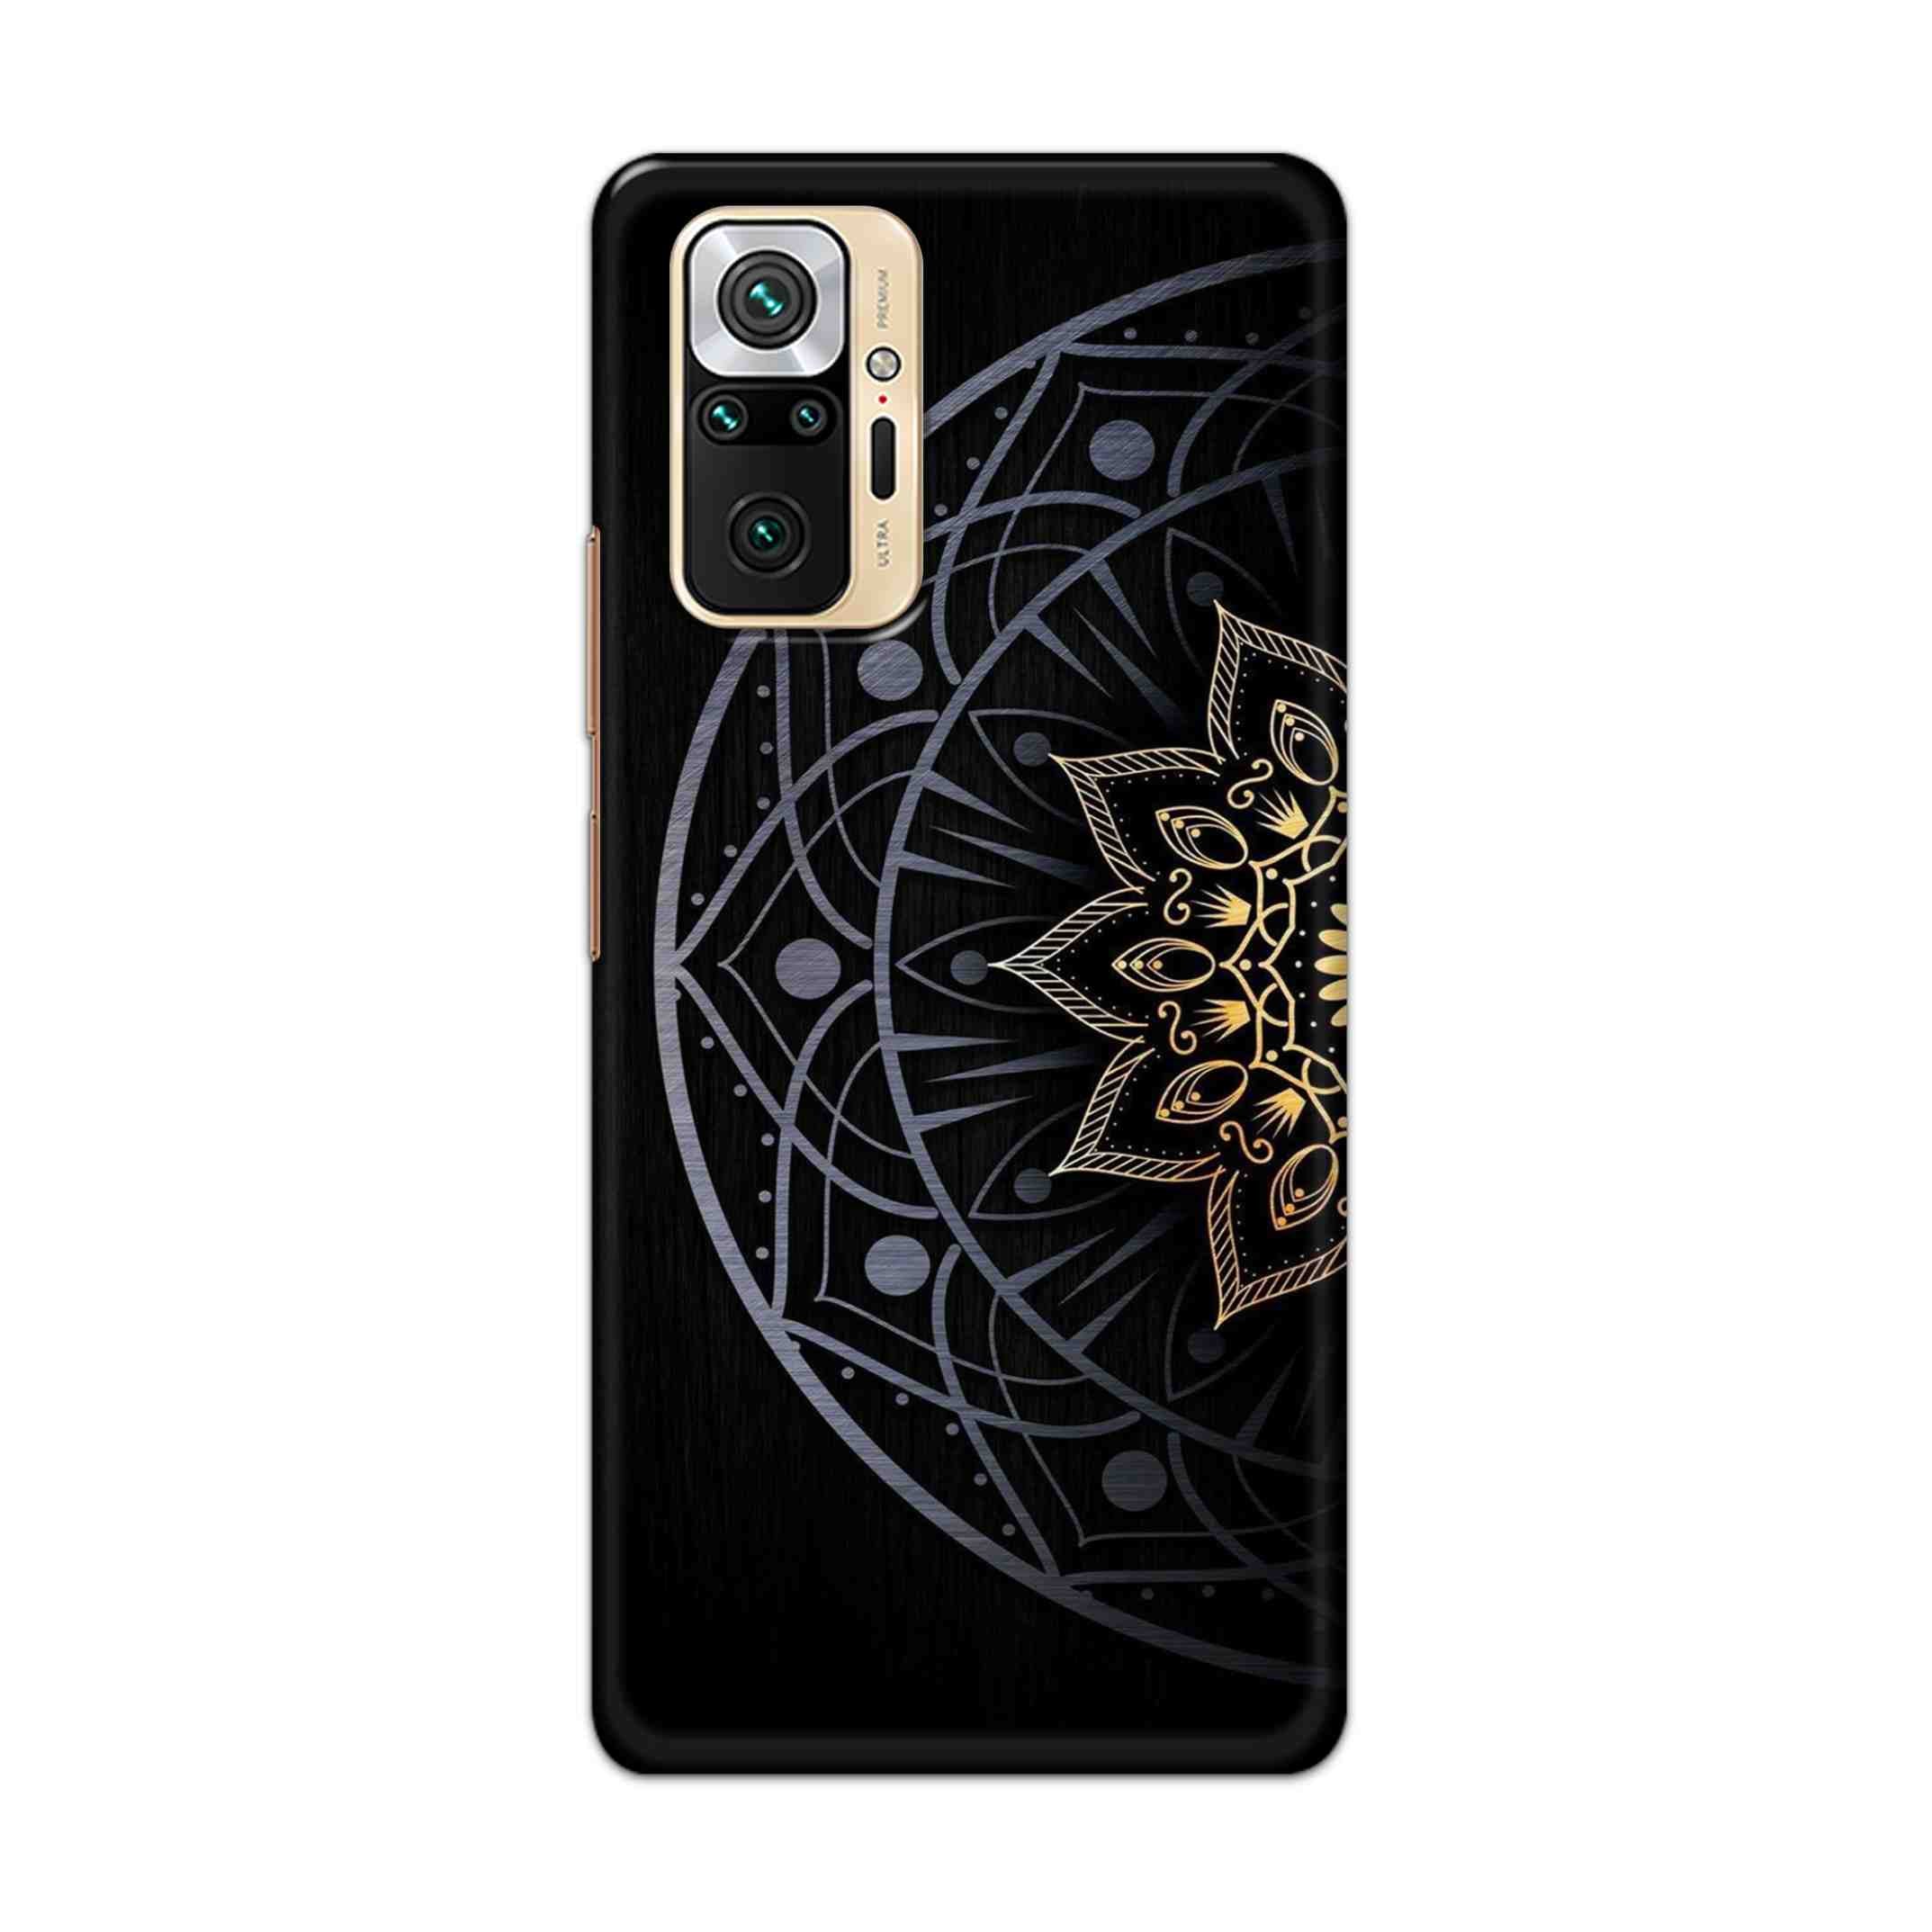 Buy Psychedelic Mandalas Hard Back Mobile Phone Case Cover For Redmi Note 10 Pro Online